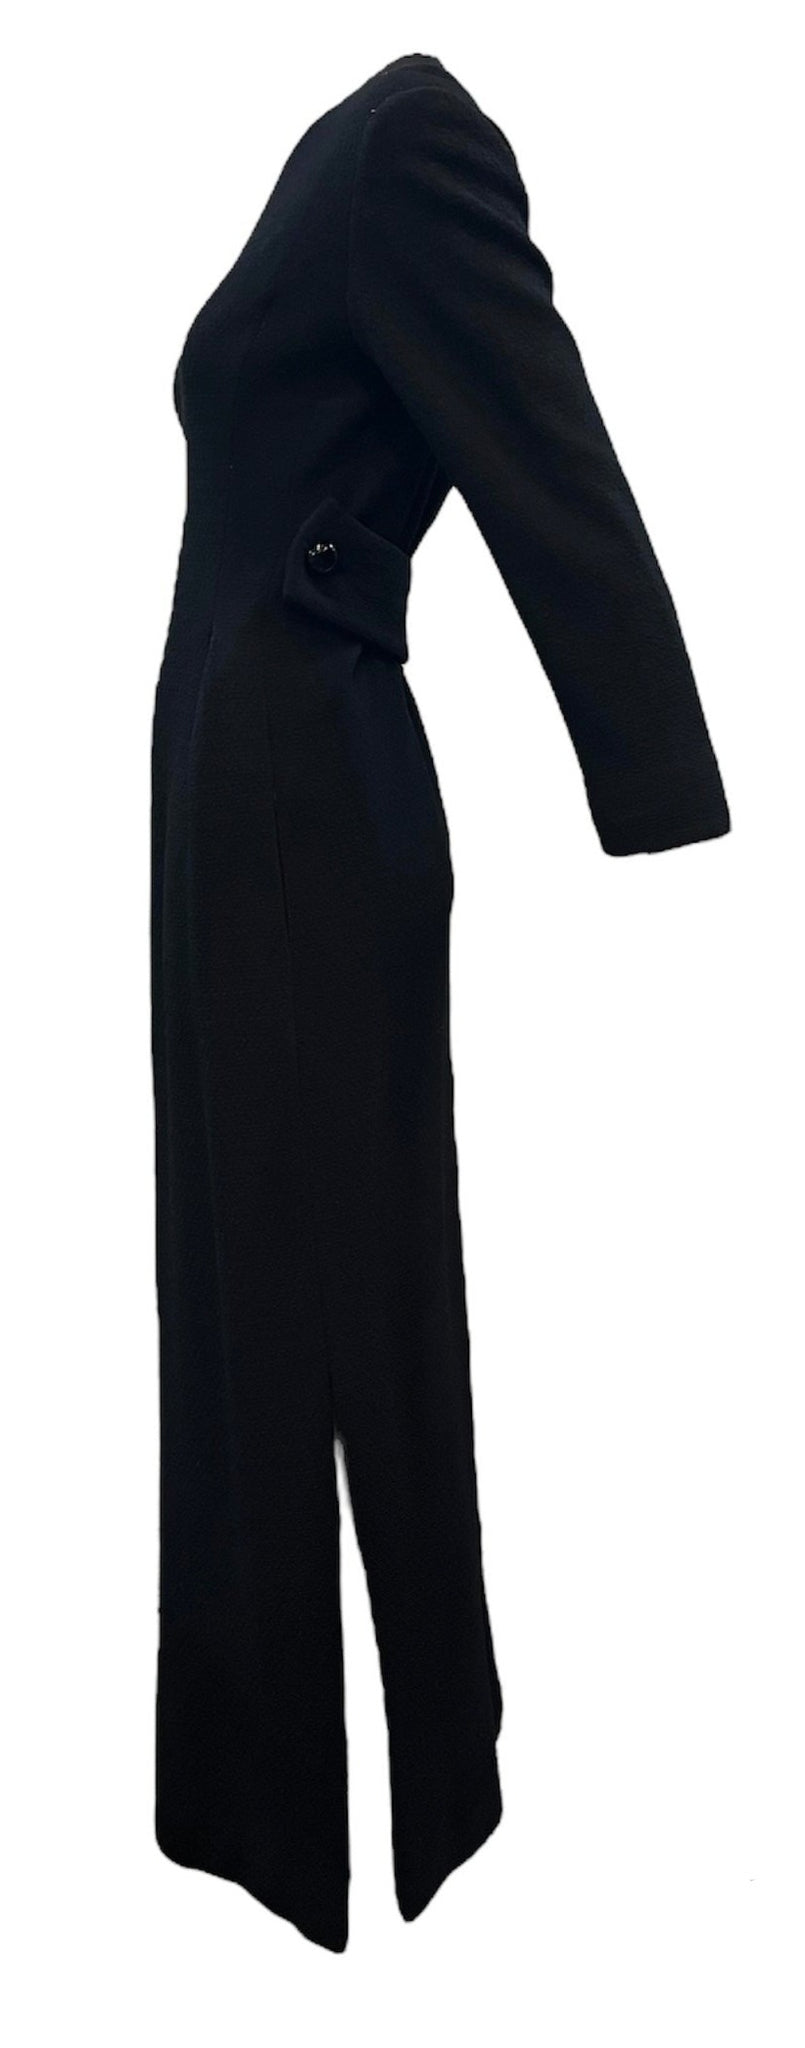    James Galanos 1970s Black Wool Column Gown SIDE 2 of 7